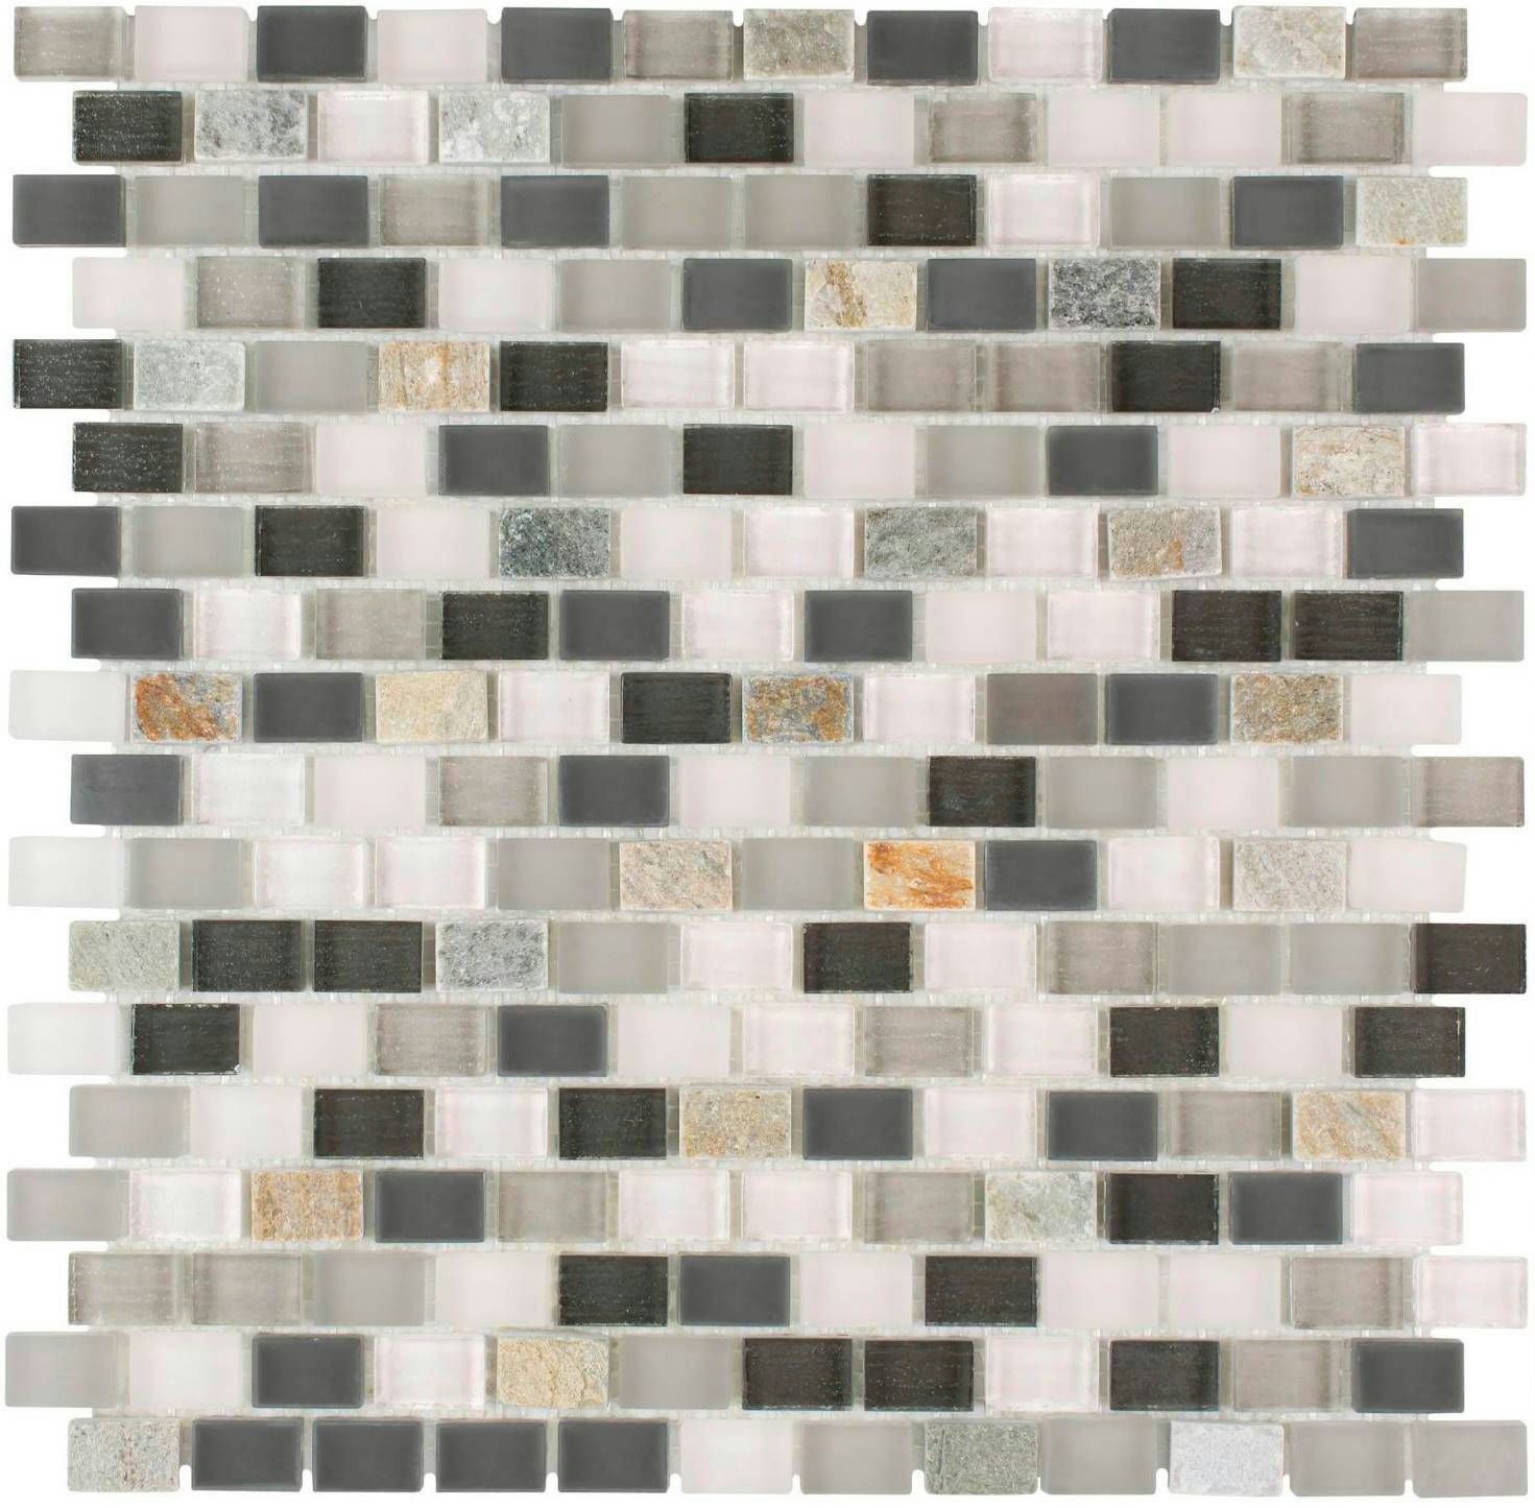 176172 | Stones & More | Finest selection of Mosaics, Glass, Tile and Stone